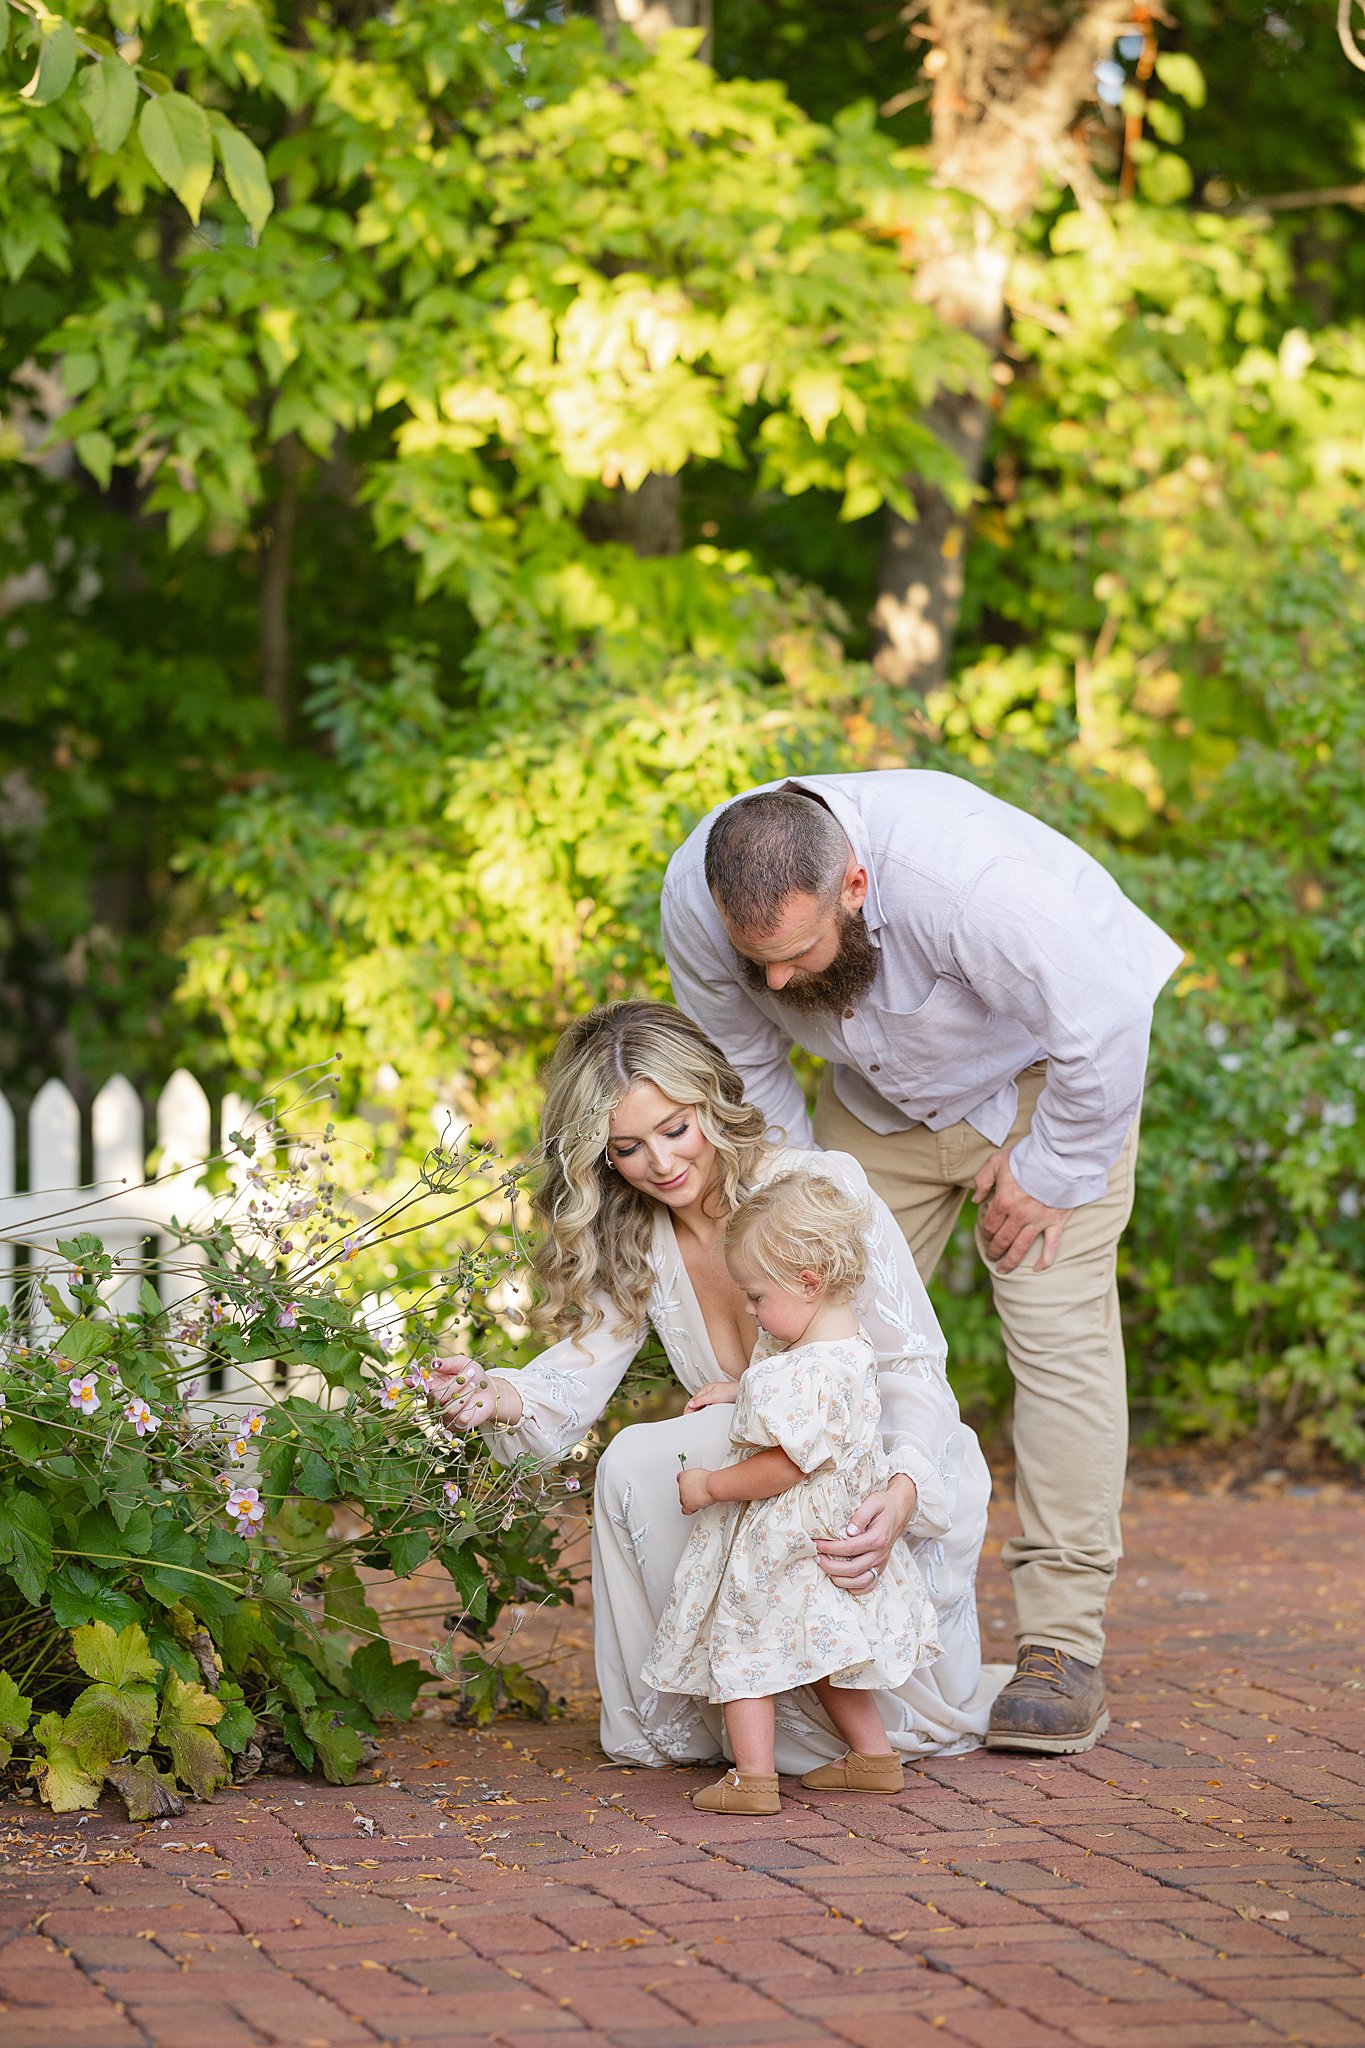 A mom and dad explore a garden and some pink flowers with their young toddler daughter